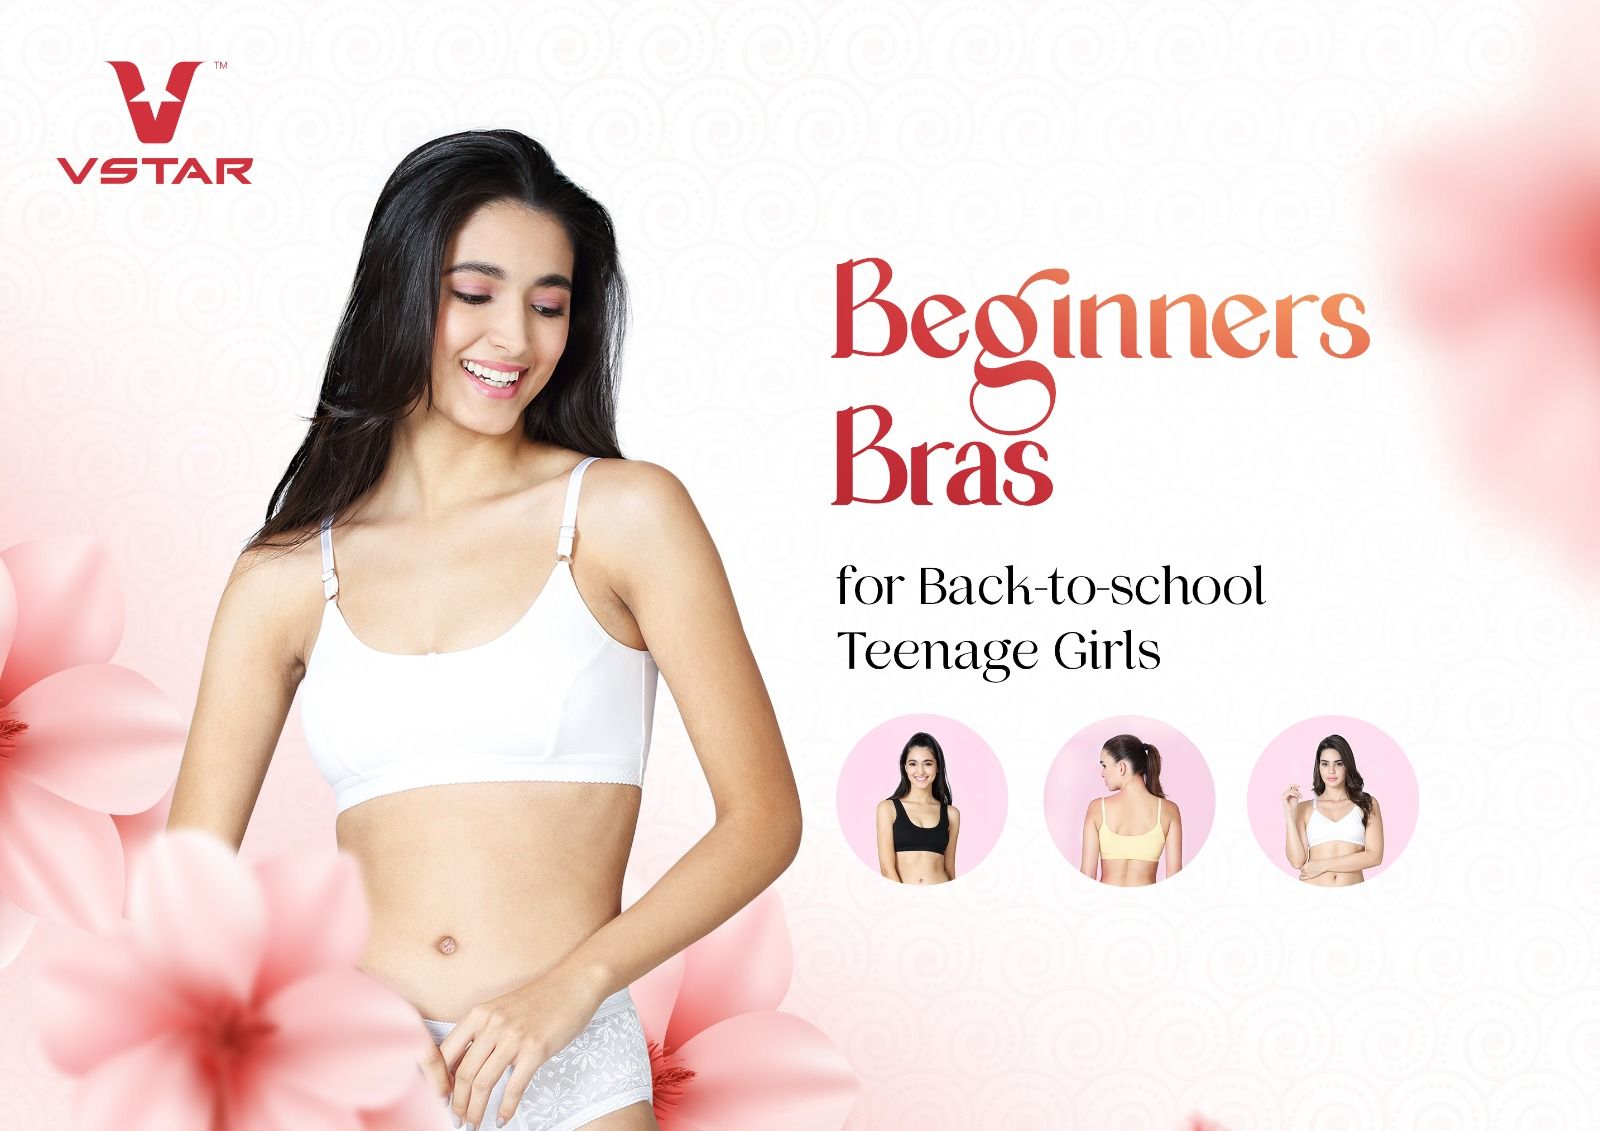 Are you daring enough to wear barely-there bra? That bust about covers it